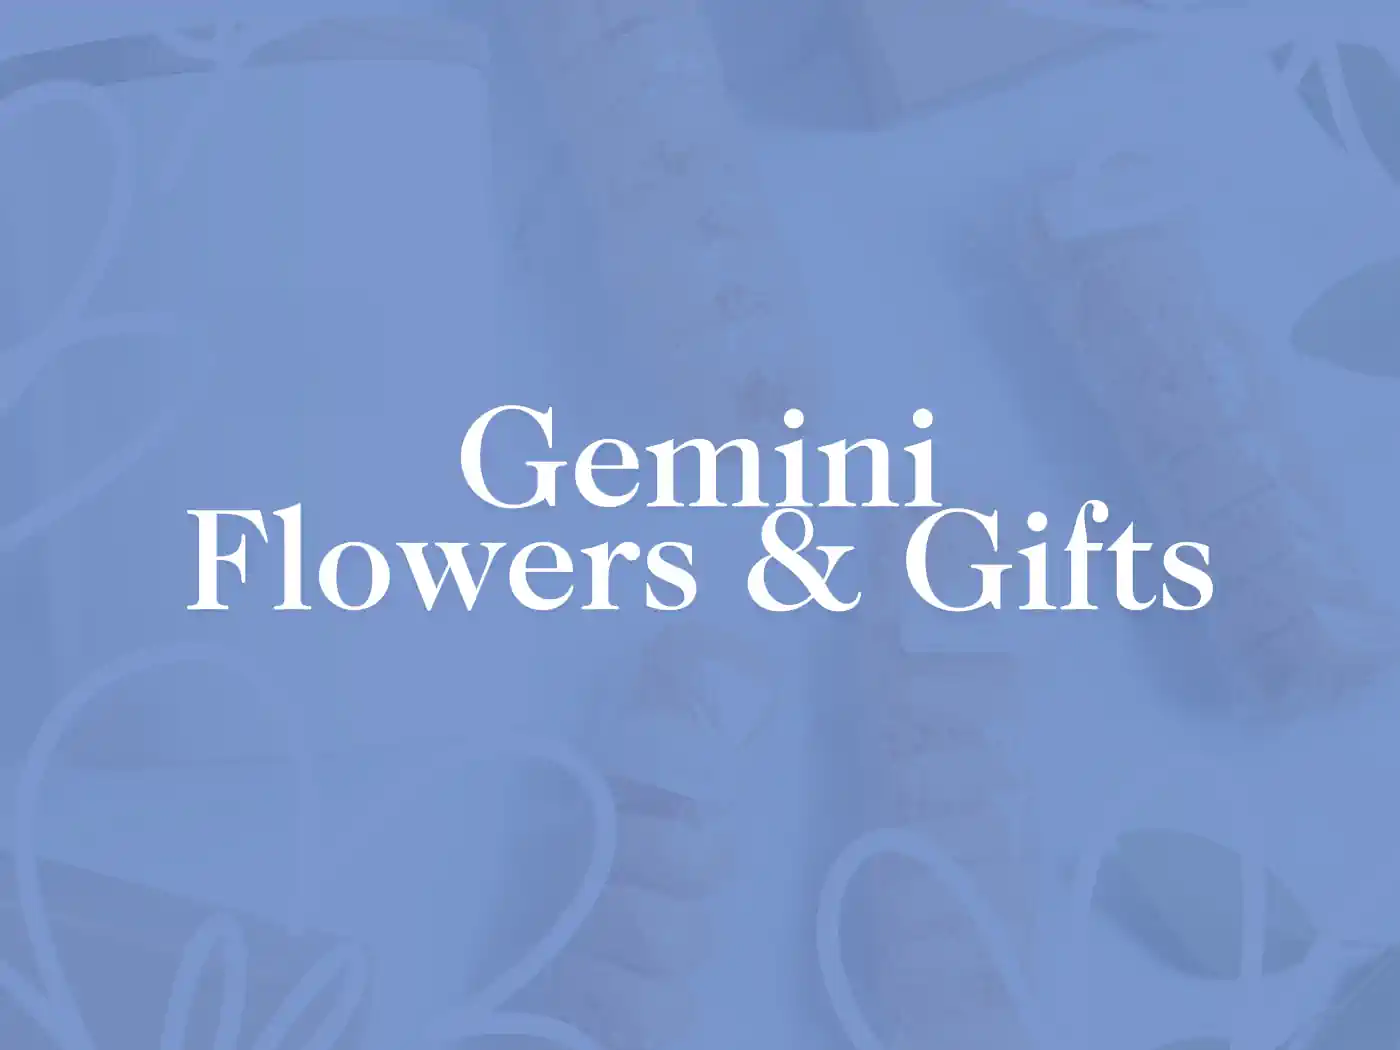 A beautiful assortment of wrapped gifts on a light blue background. Gemini Flowers & Gifts Collection. Fabulous Flowers and Gifts.